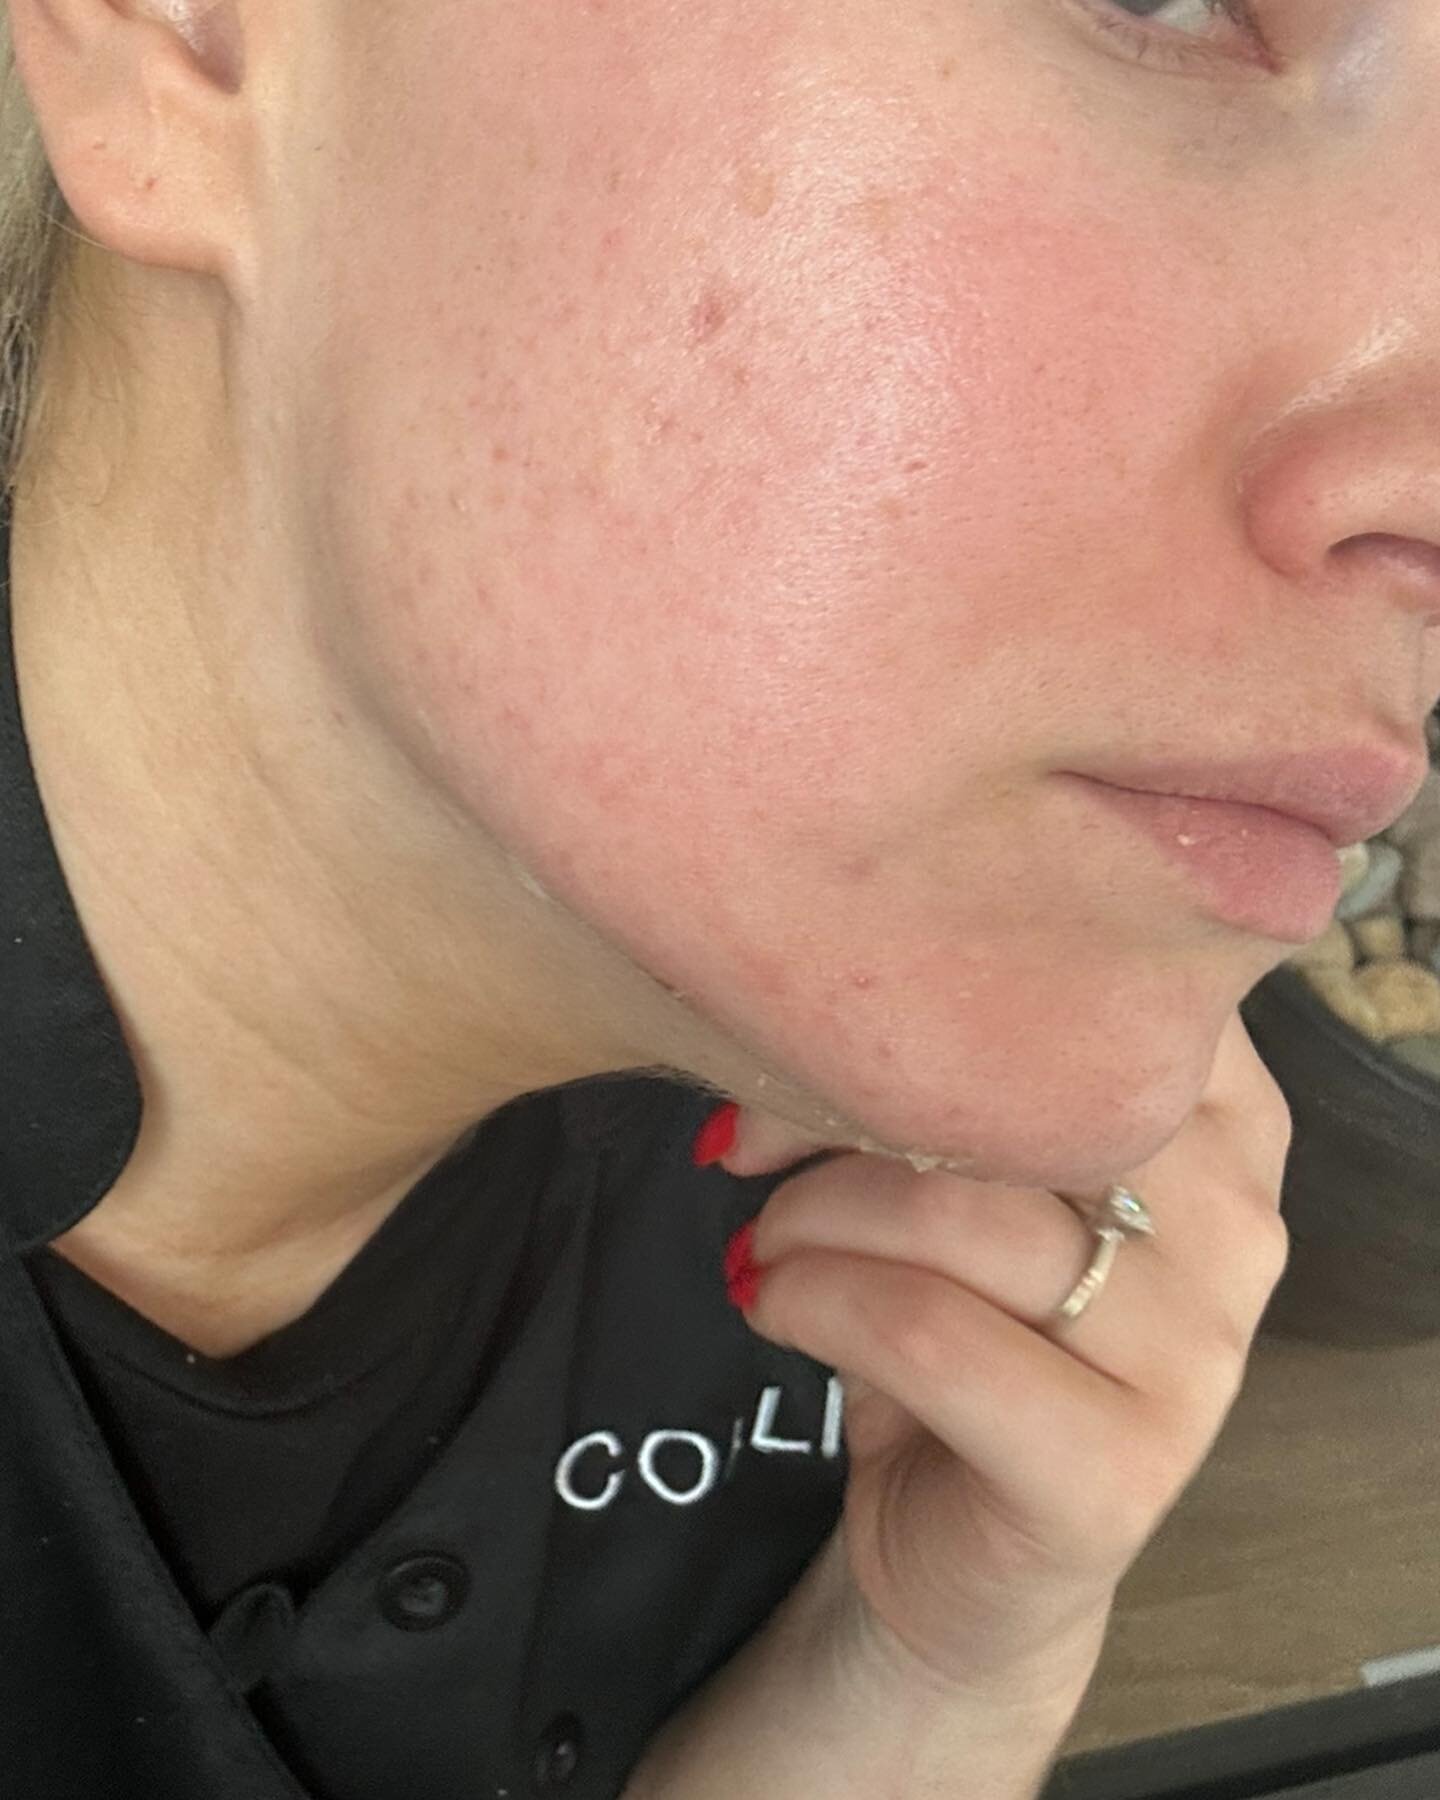 Timeless + Deep Sea Peel days 5-8. Slight flaking on forehead. Couple spots of pigmentation lifting. Smoother and even looking complexion. Some purging is healing. 

#boiseesthetician #boisespa #eagleidaho #hellomeridian #boisebucketlist #skinbrighte